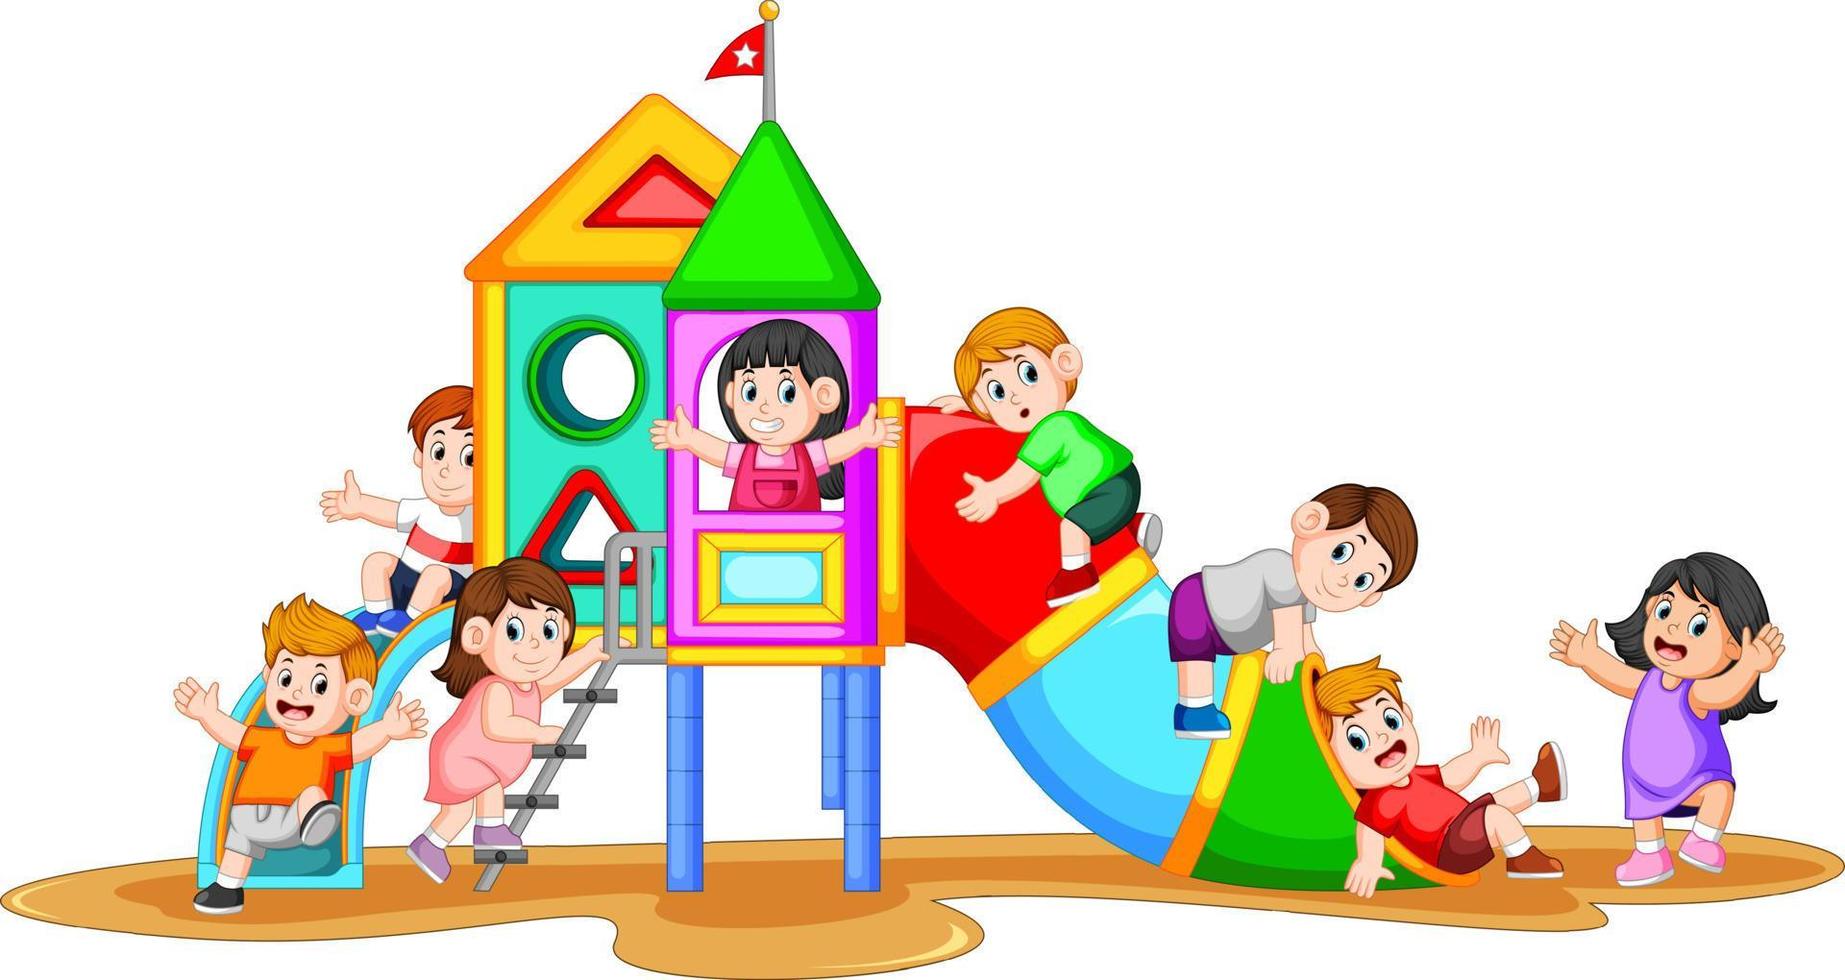 the children playing in the playground with their friend with the happy faces vector